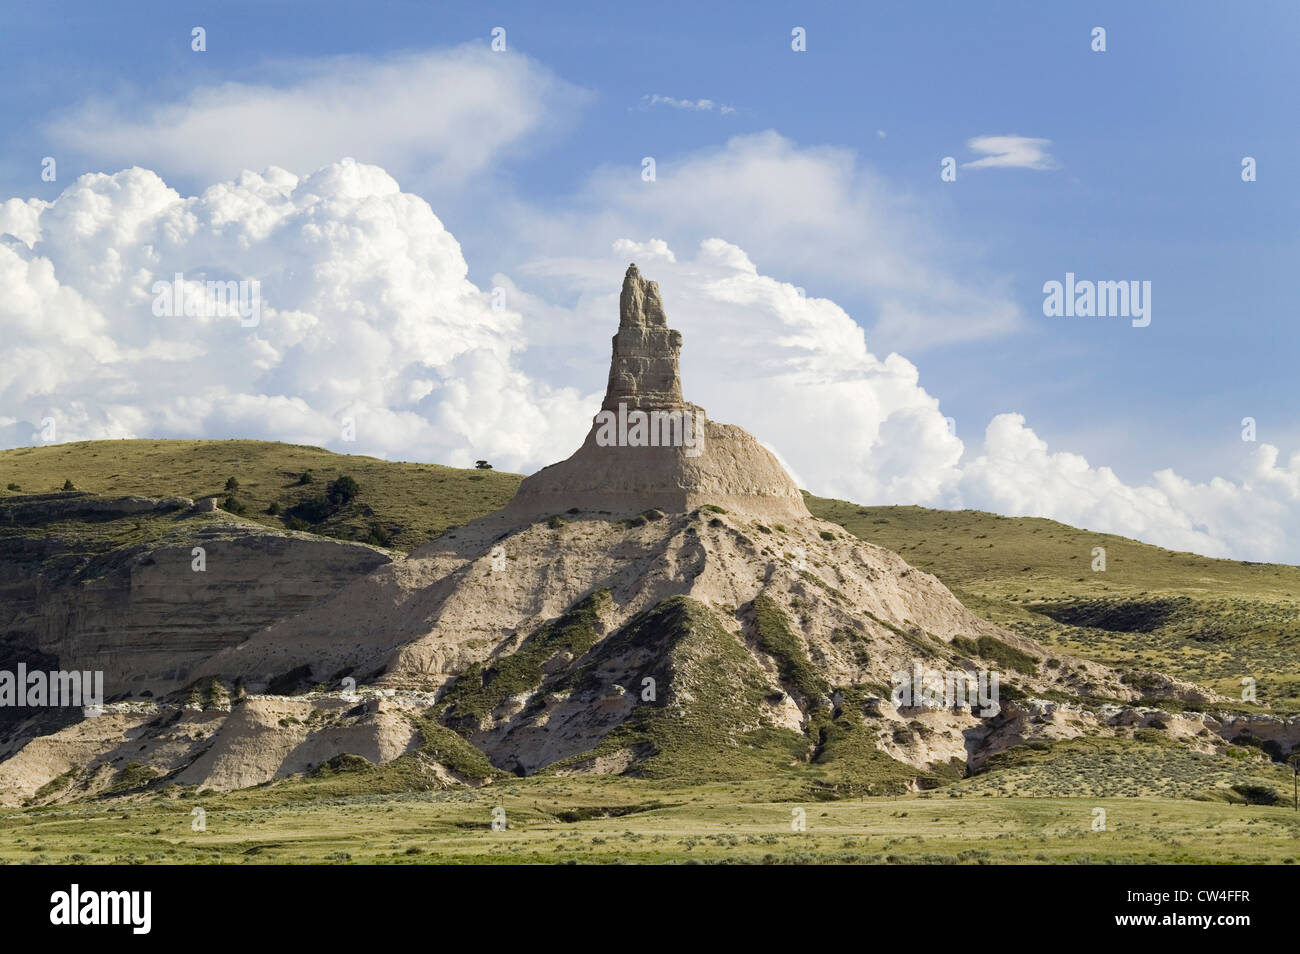 Chimney Rock National Historic Site, Nebraska, the most famous site on the Oregon Trail for early settlers and pioneers. Stock Photo